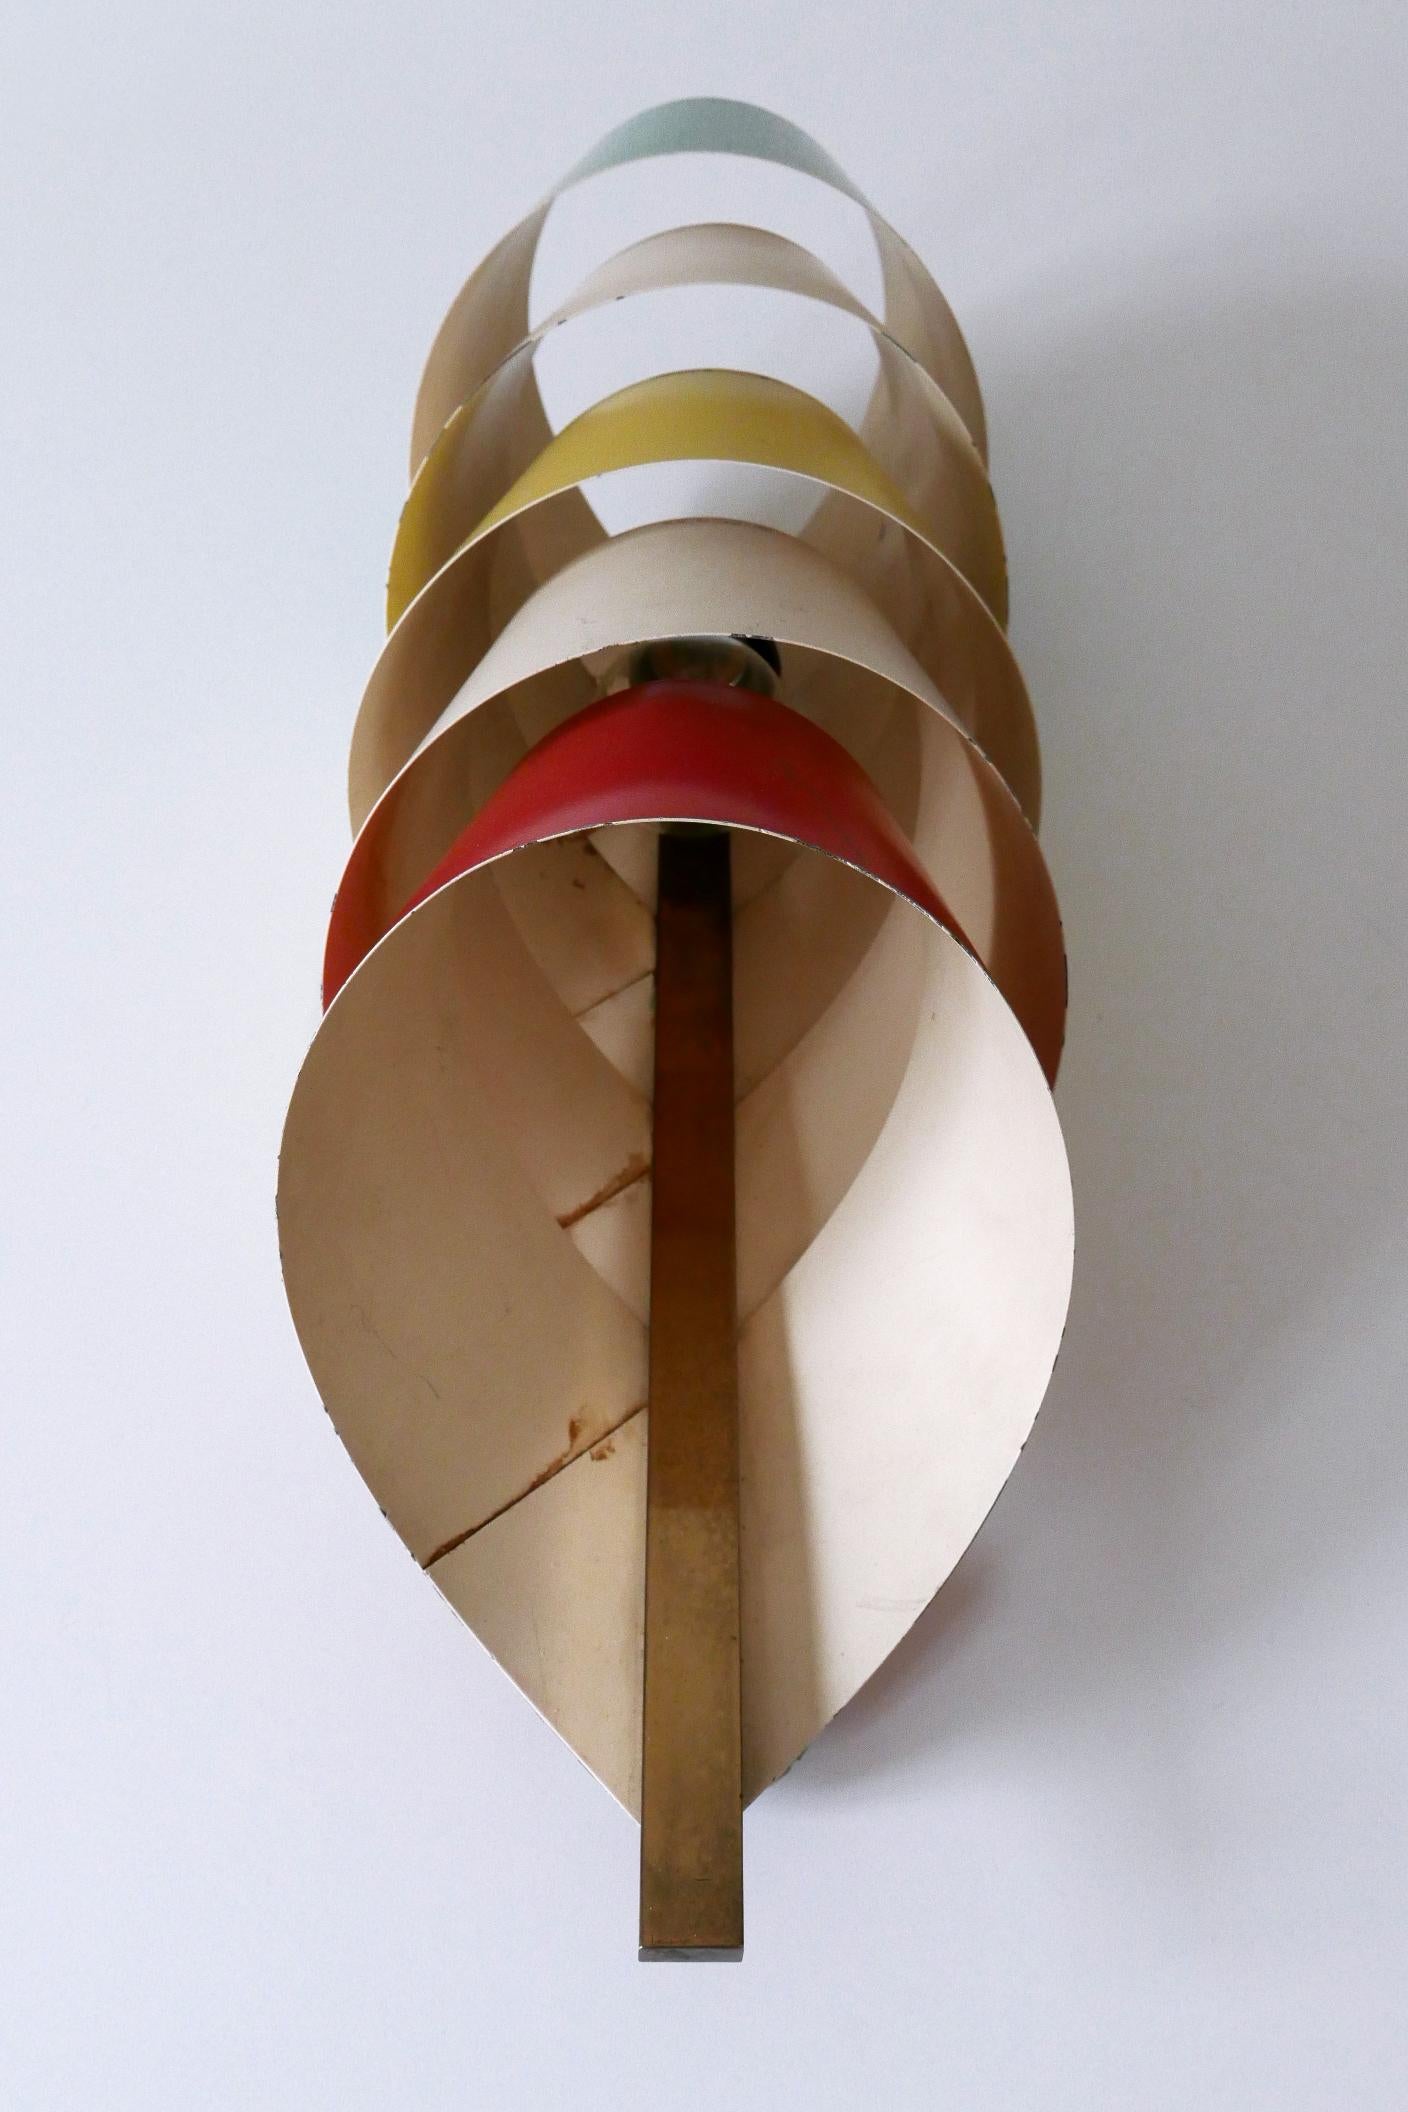 Rare & Decorative Mid-Century Modern Sconce or Wall Lamp Scandinavia 1950s For Sale 12